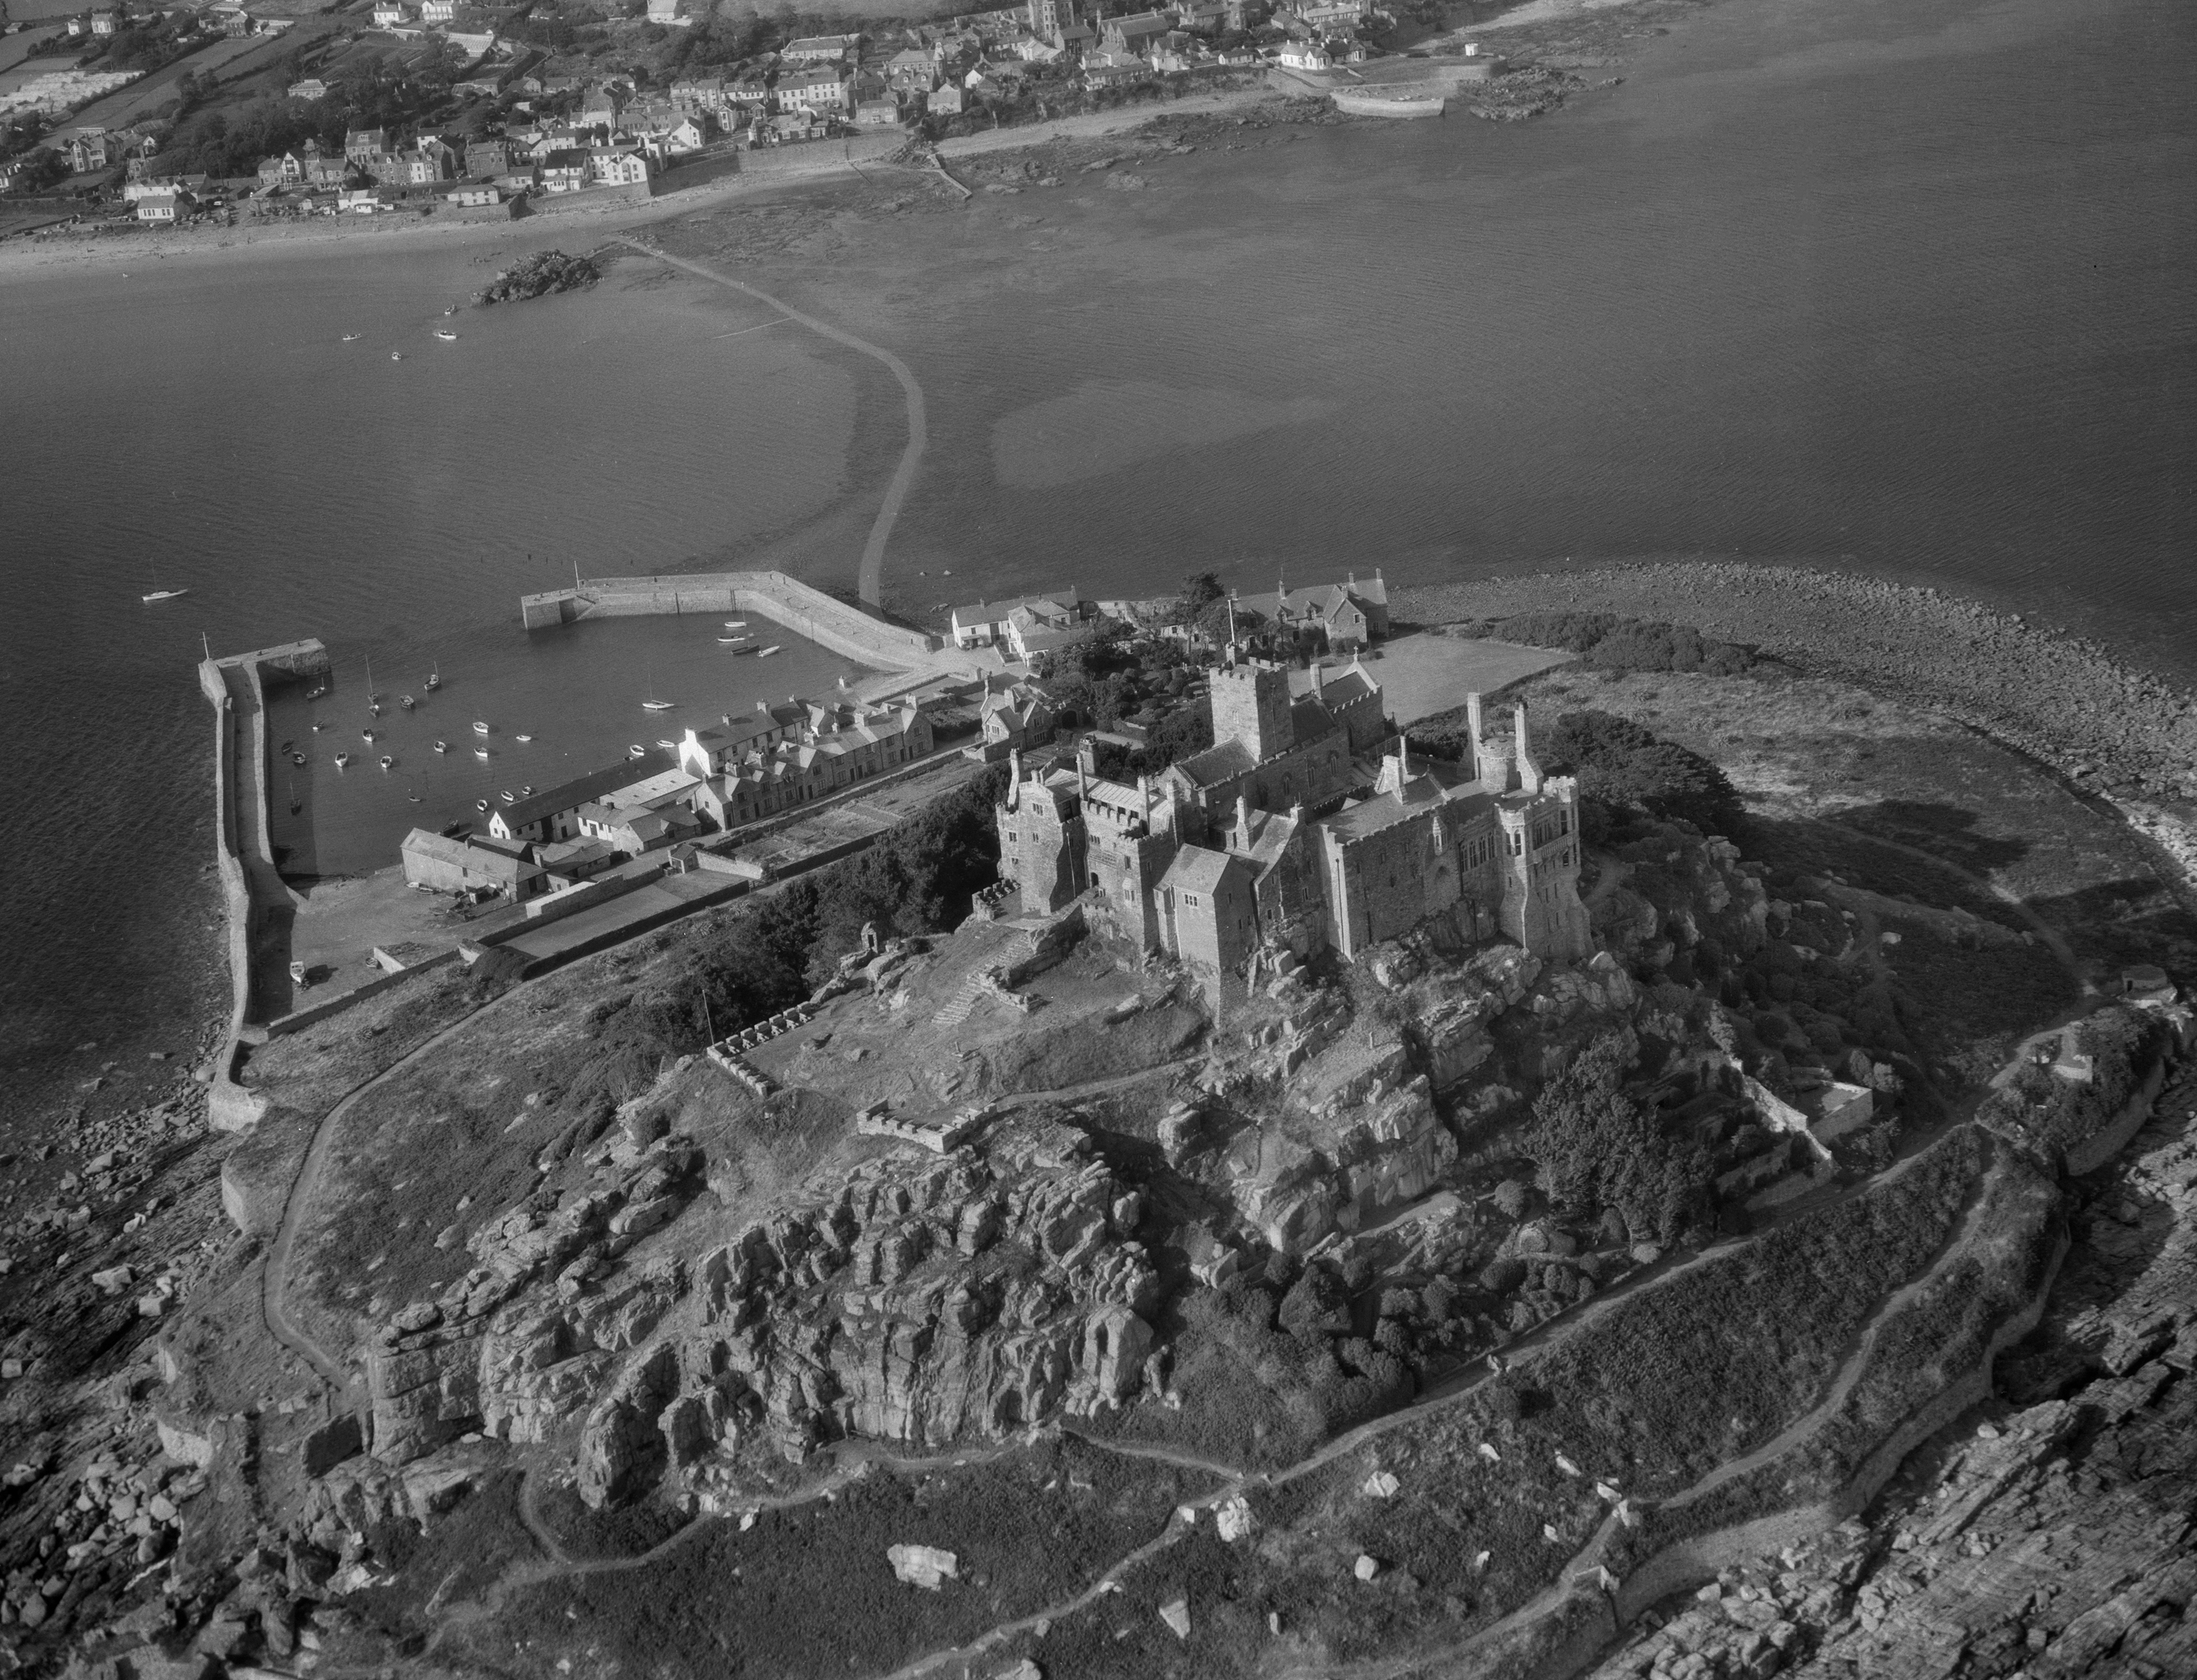 St Michael’s Mount in Cornwall remains a popular tourist destination (Historic England Archive/Harold Wingham Collection/PA).